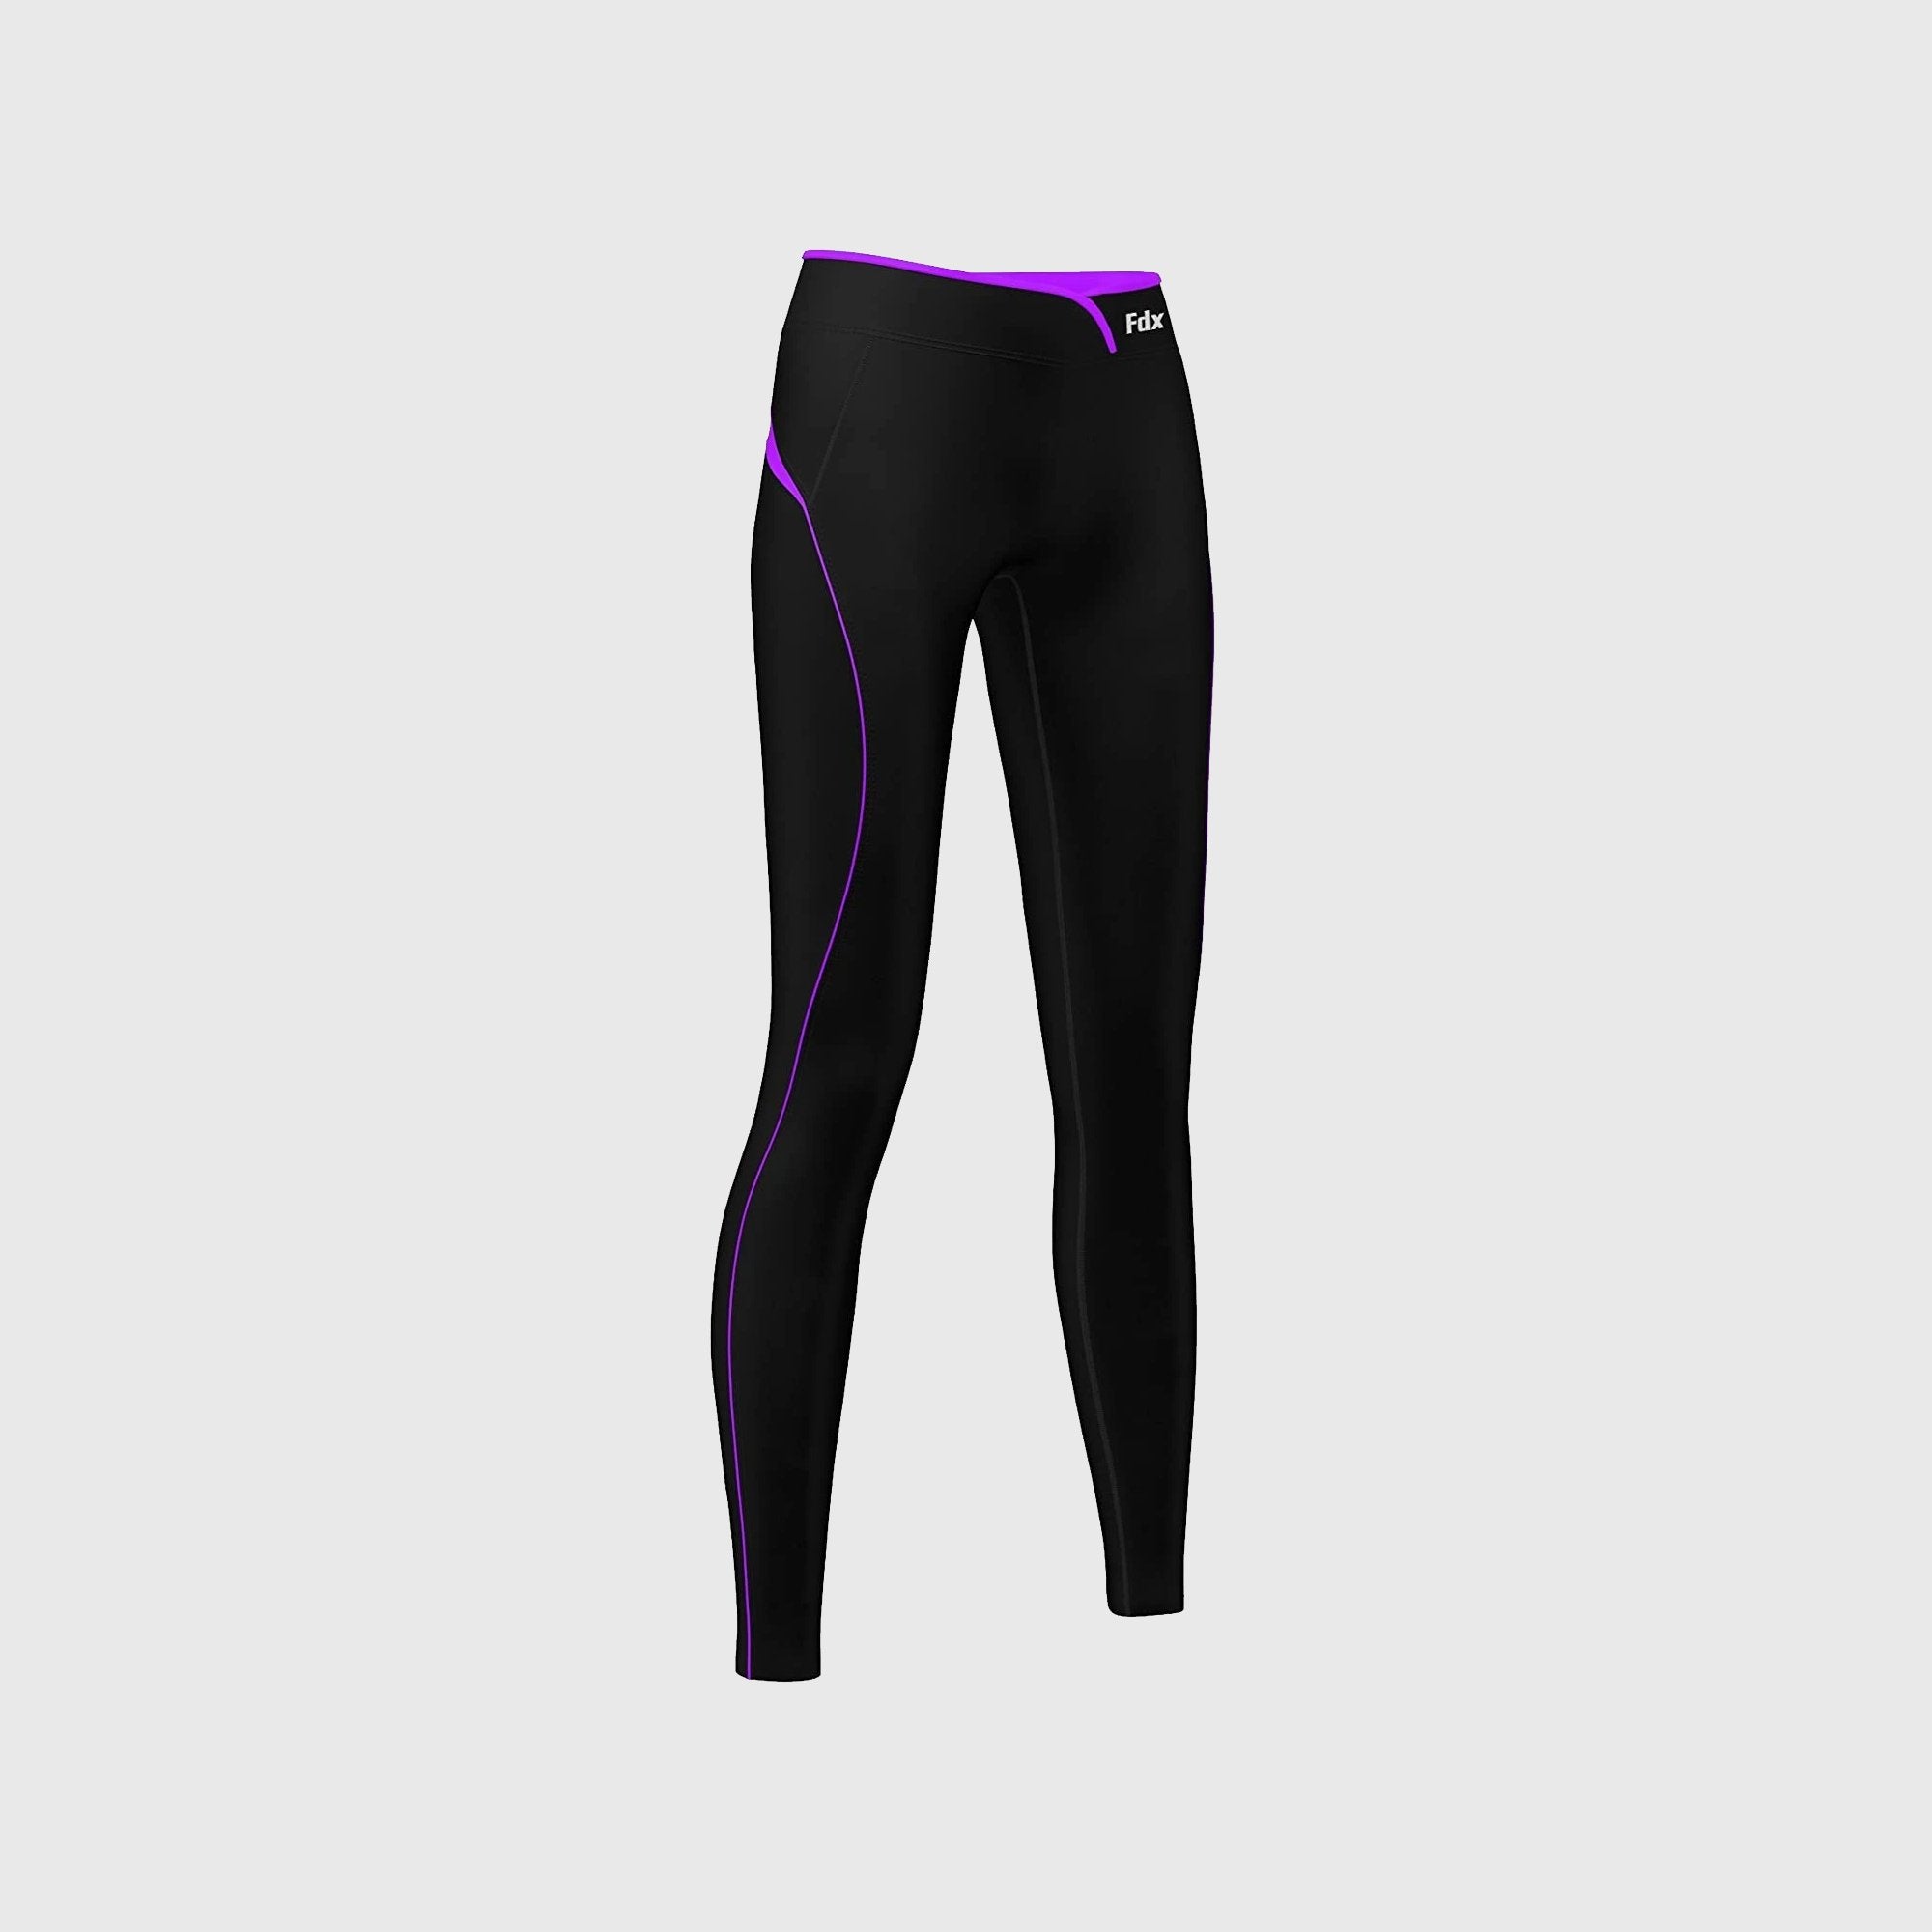 FDX Black & Purple Compression Women's Tight Leggings Elastic Waistband Breathable Stretchable Training Gym Workout Jogging Athletic & Running Pant 